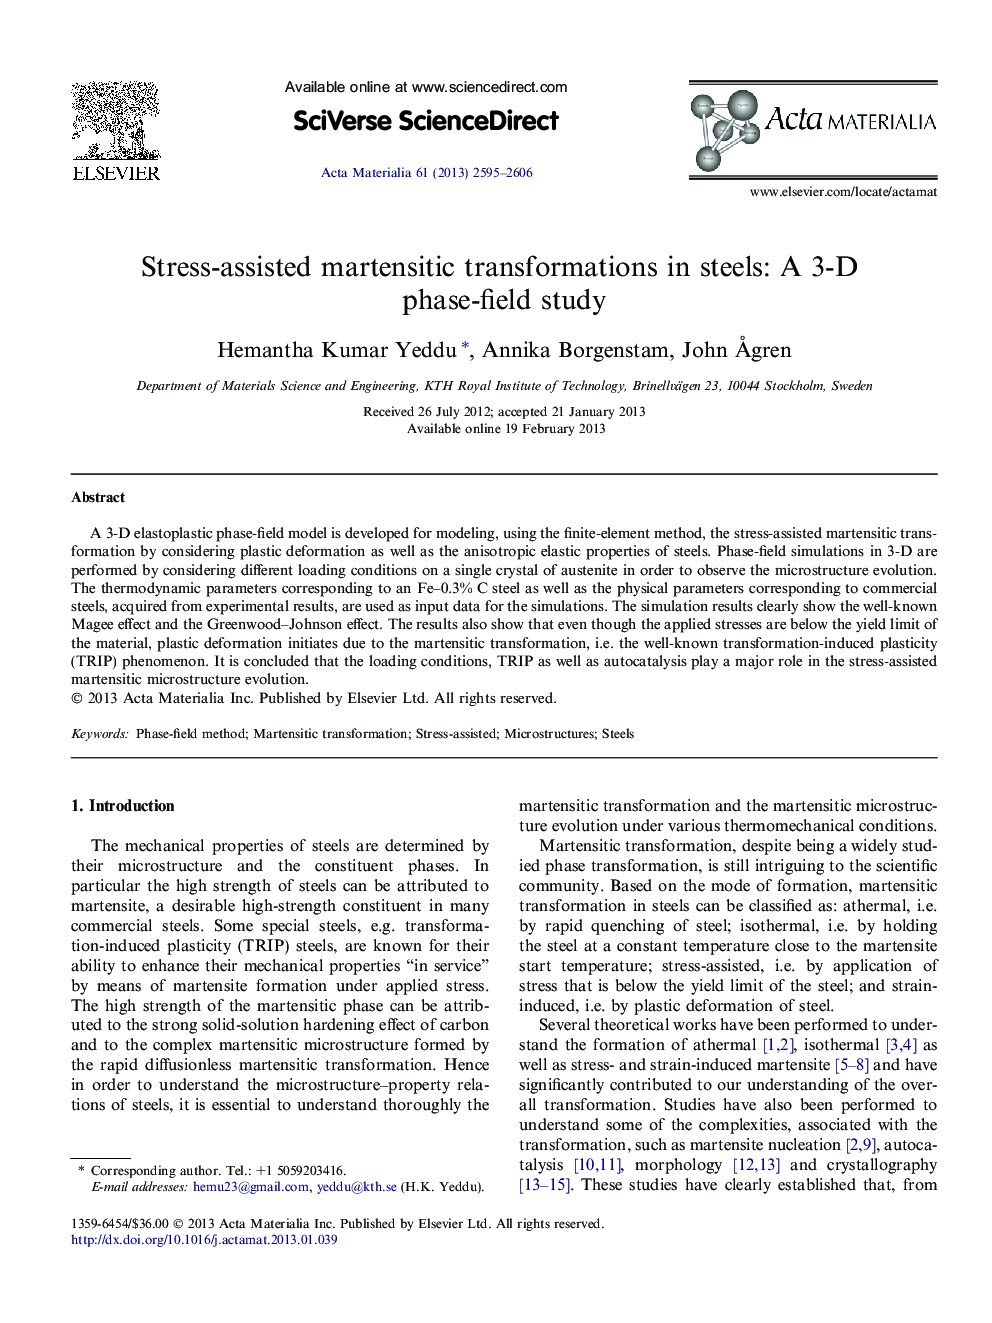 Stress-assisted martensitic transformations in steels: A 3-D phase-field study